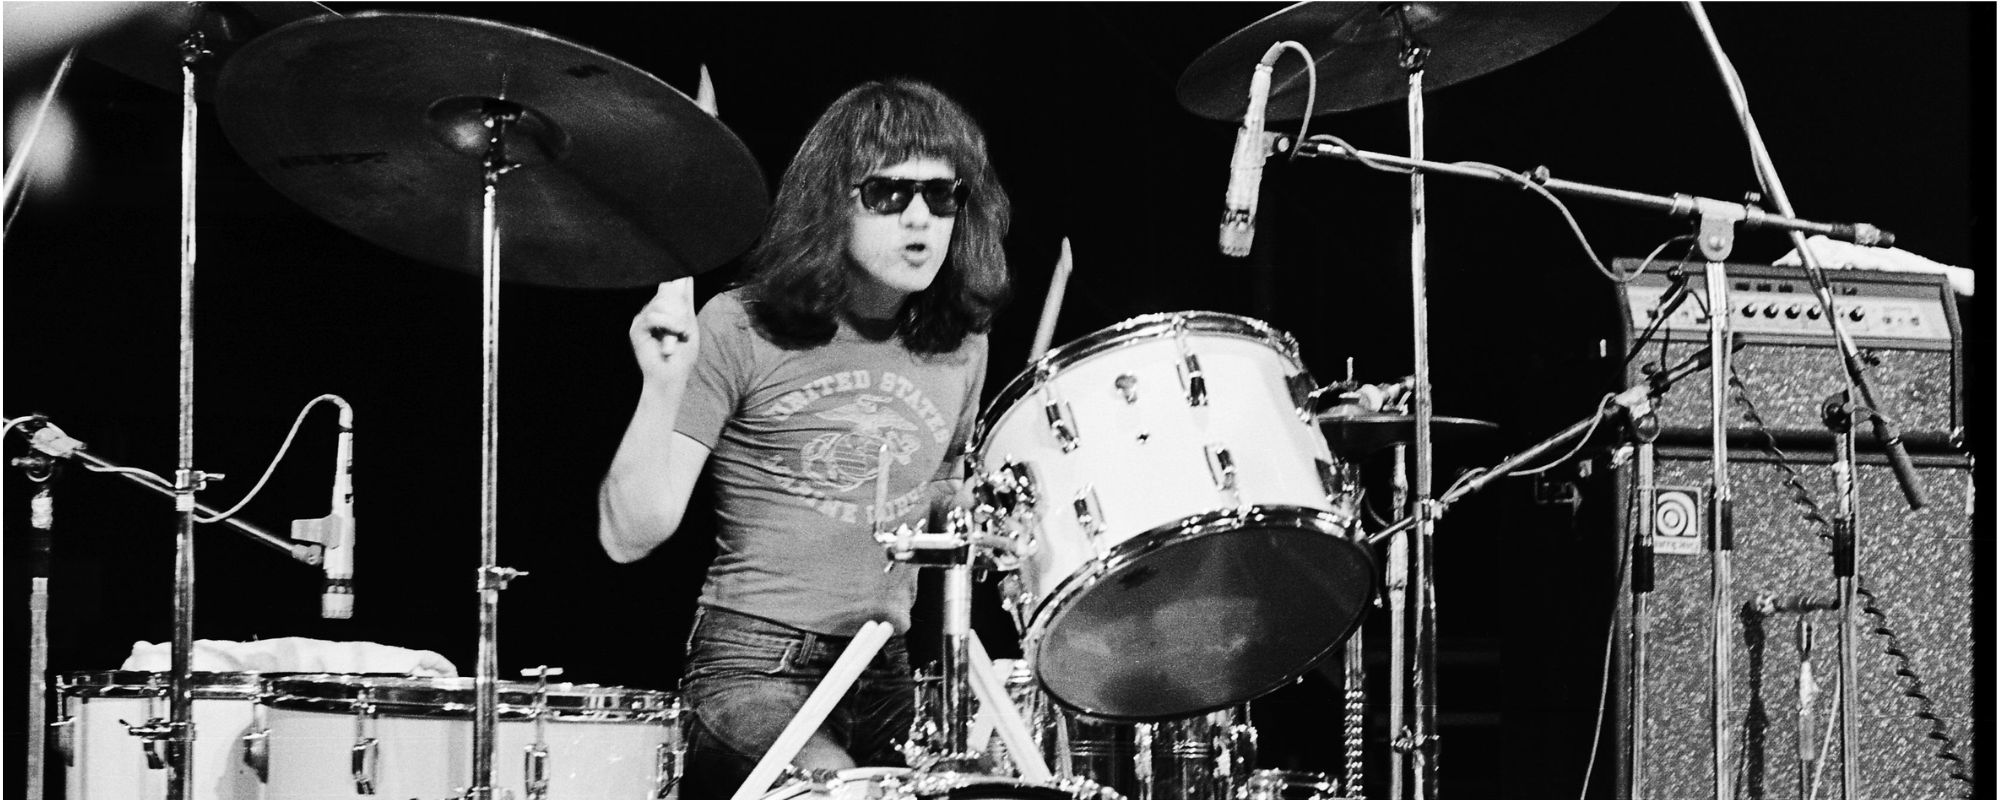 4 Live Moments in Memory of Tommy Ramone